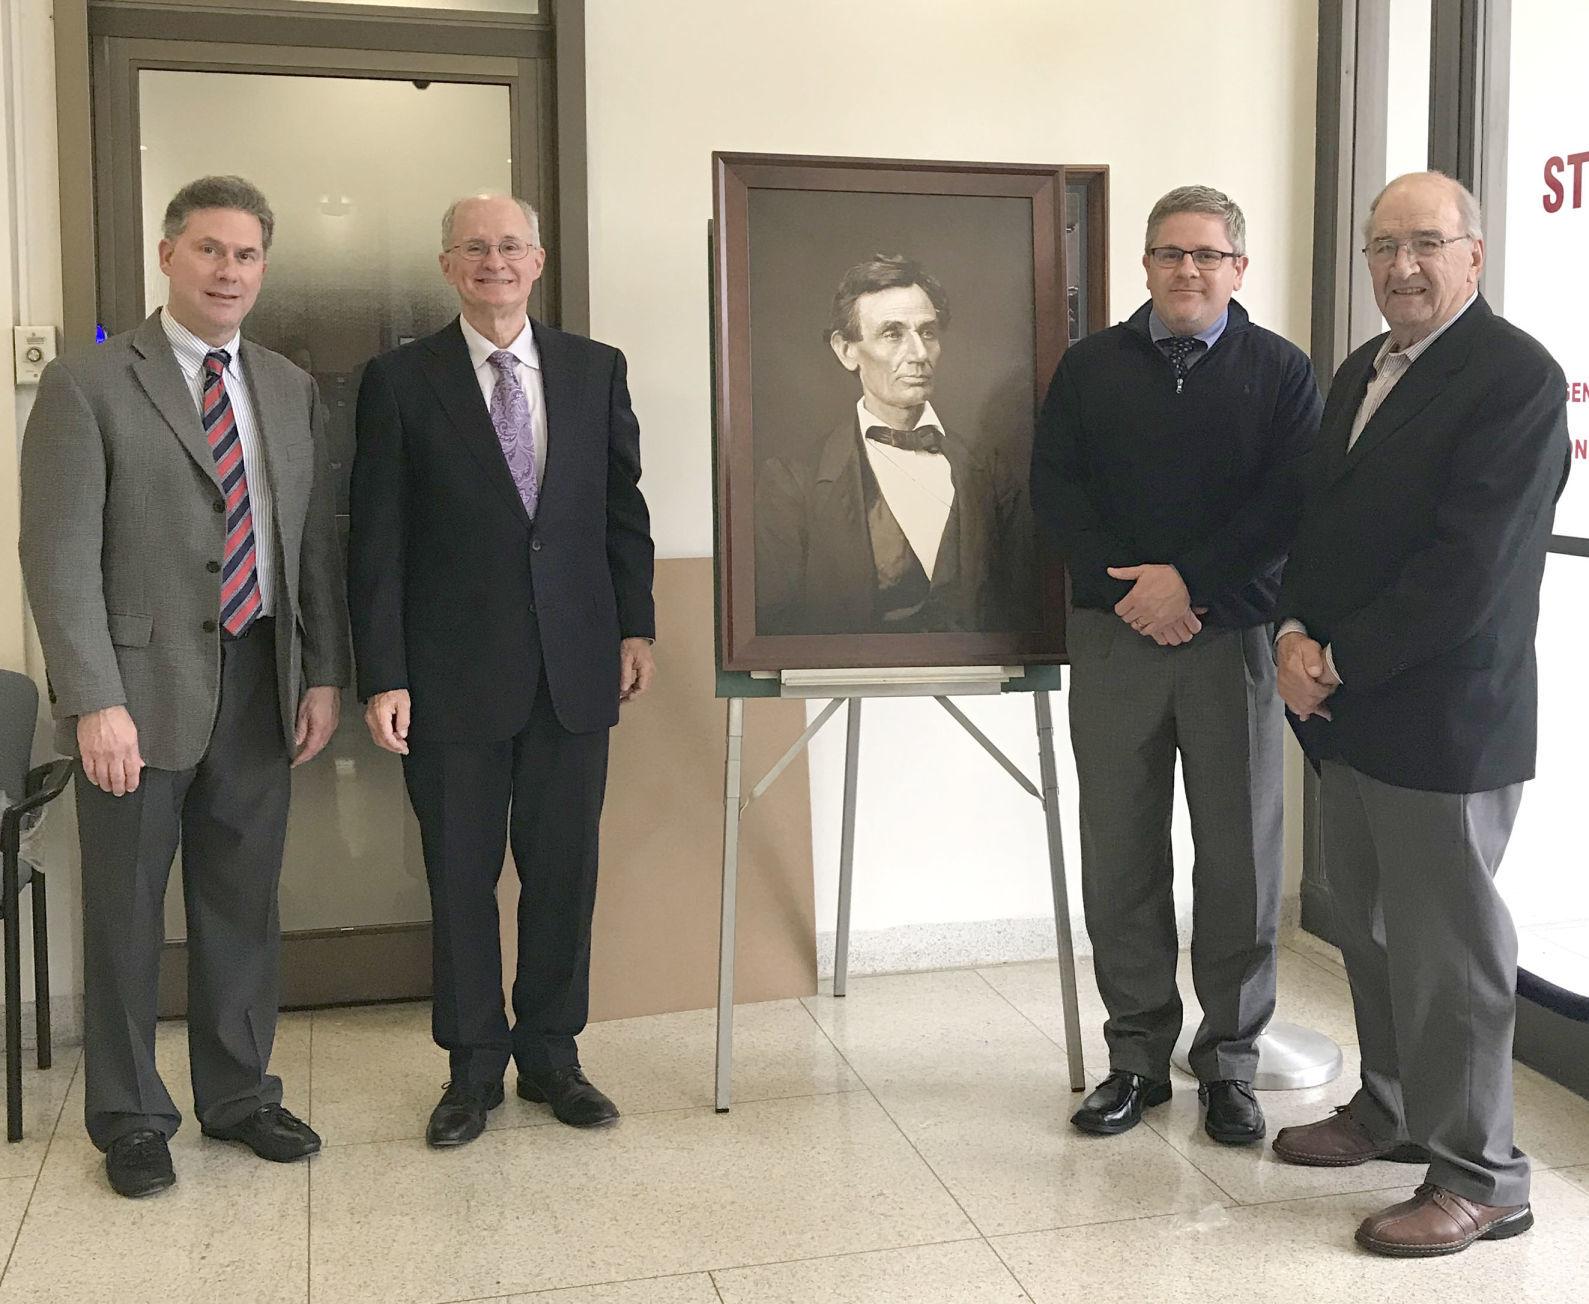 Iroquois County presented with Lincoln portrait | Iroquois County's ...